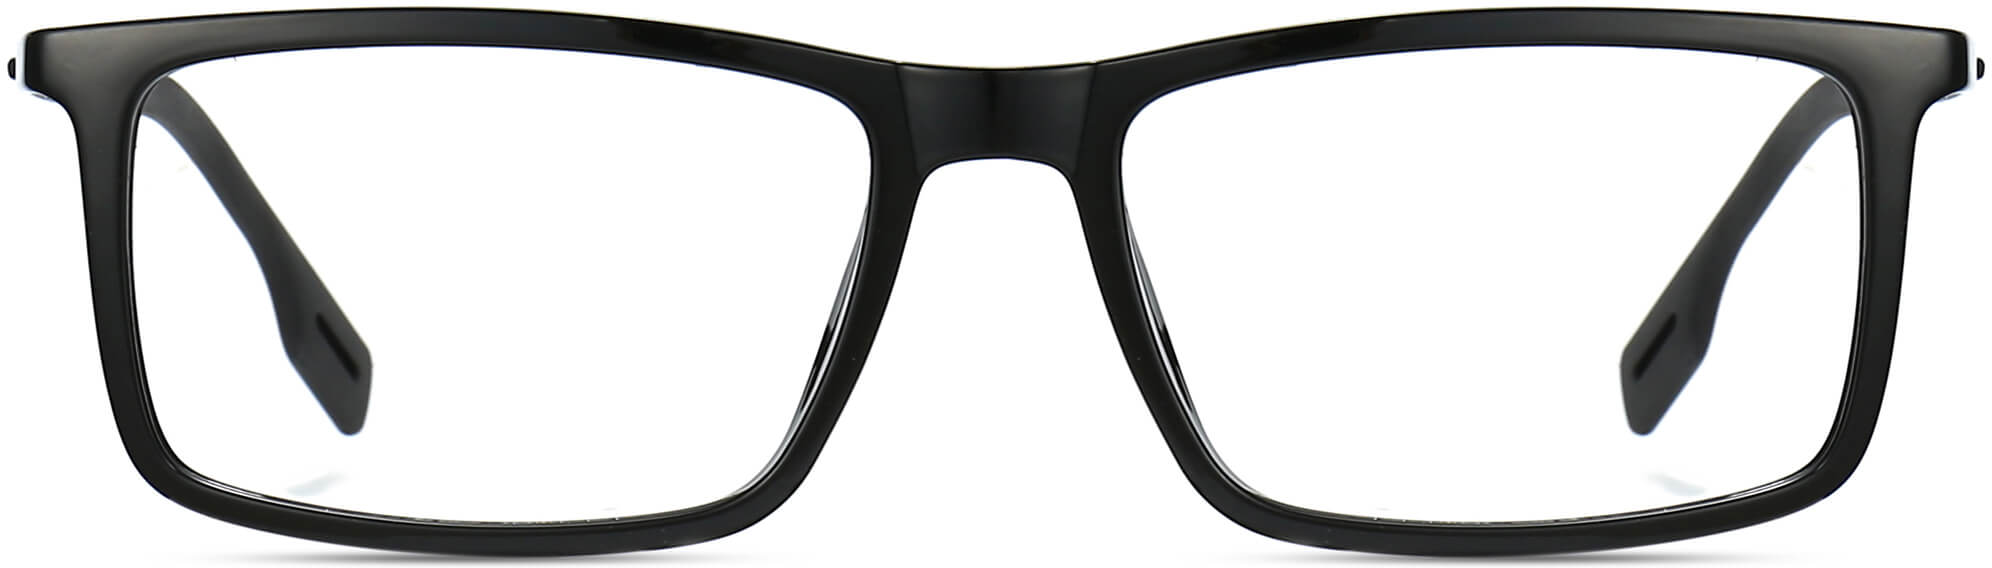 Brooklyn Rectangle Black Eyeglasses from ANRRI, front view